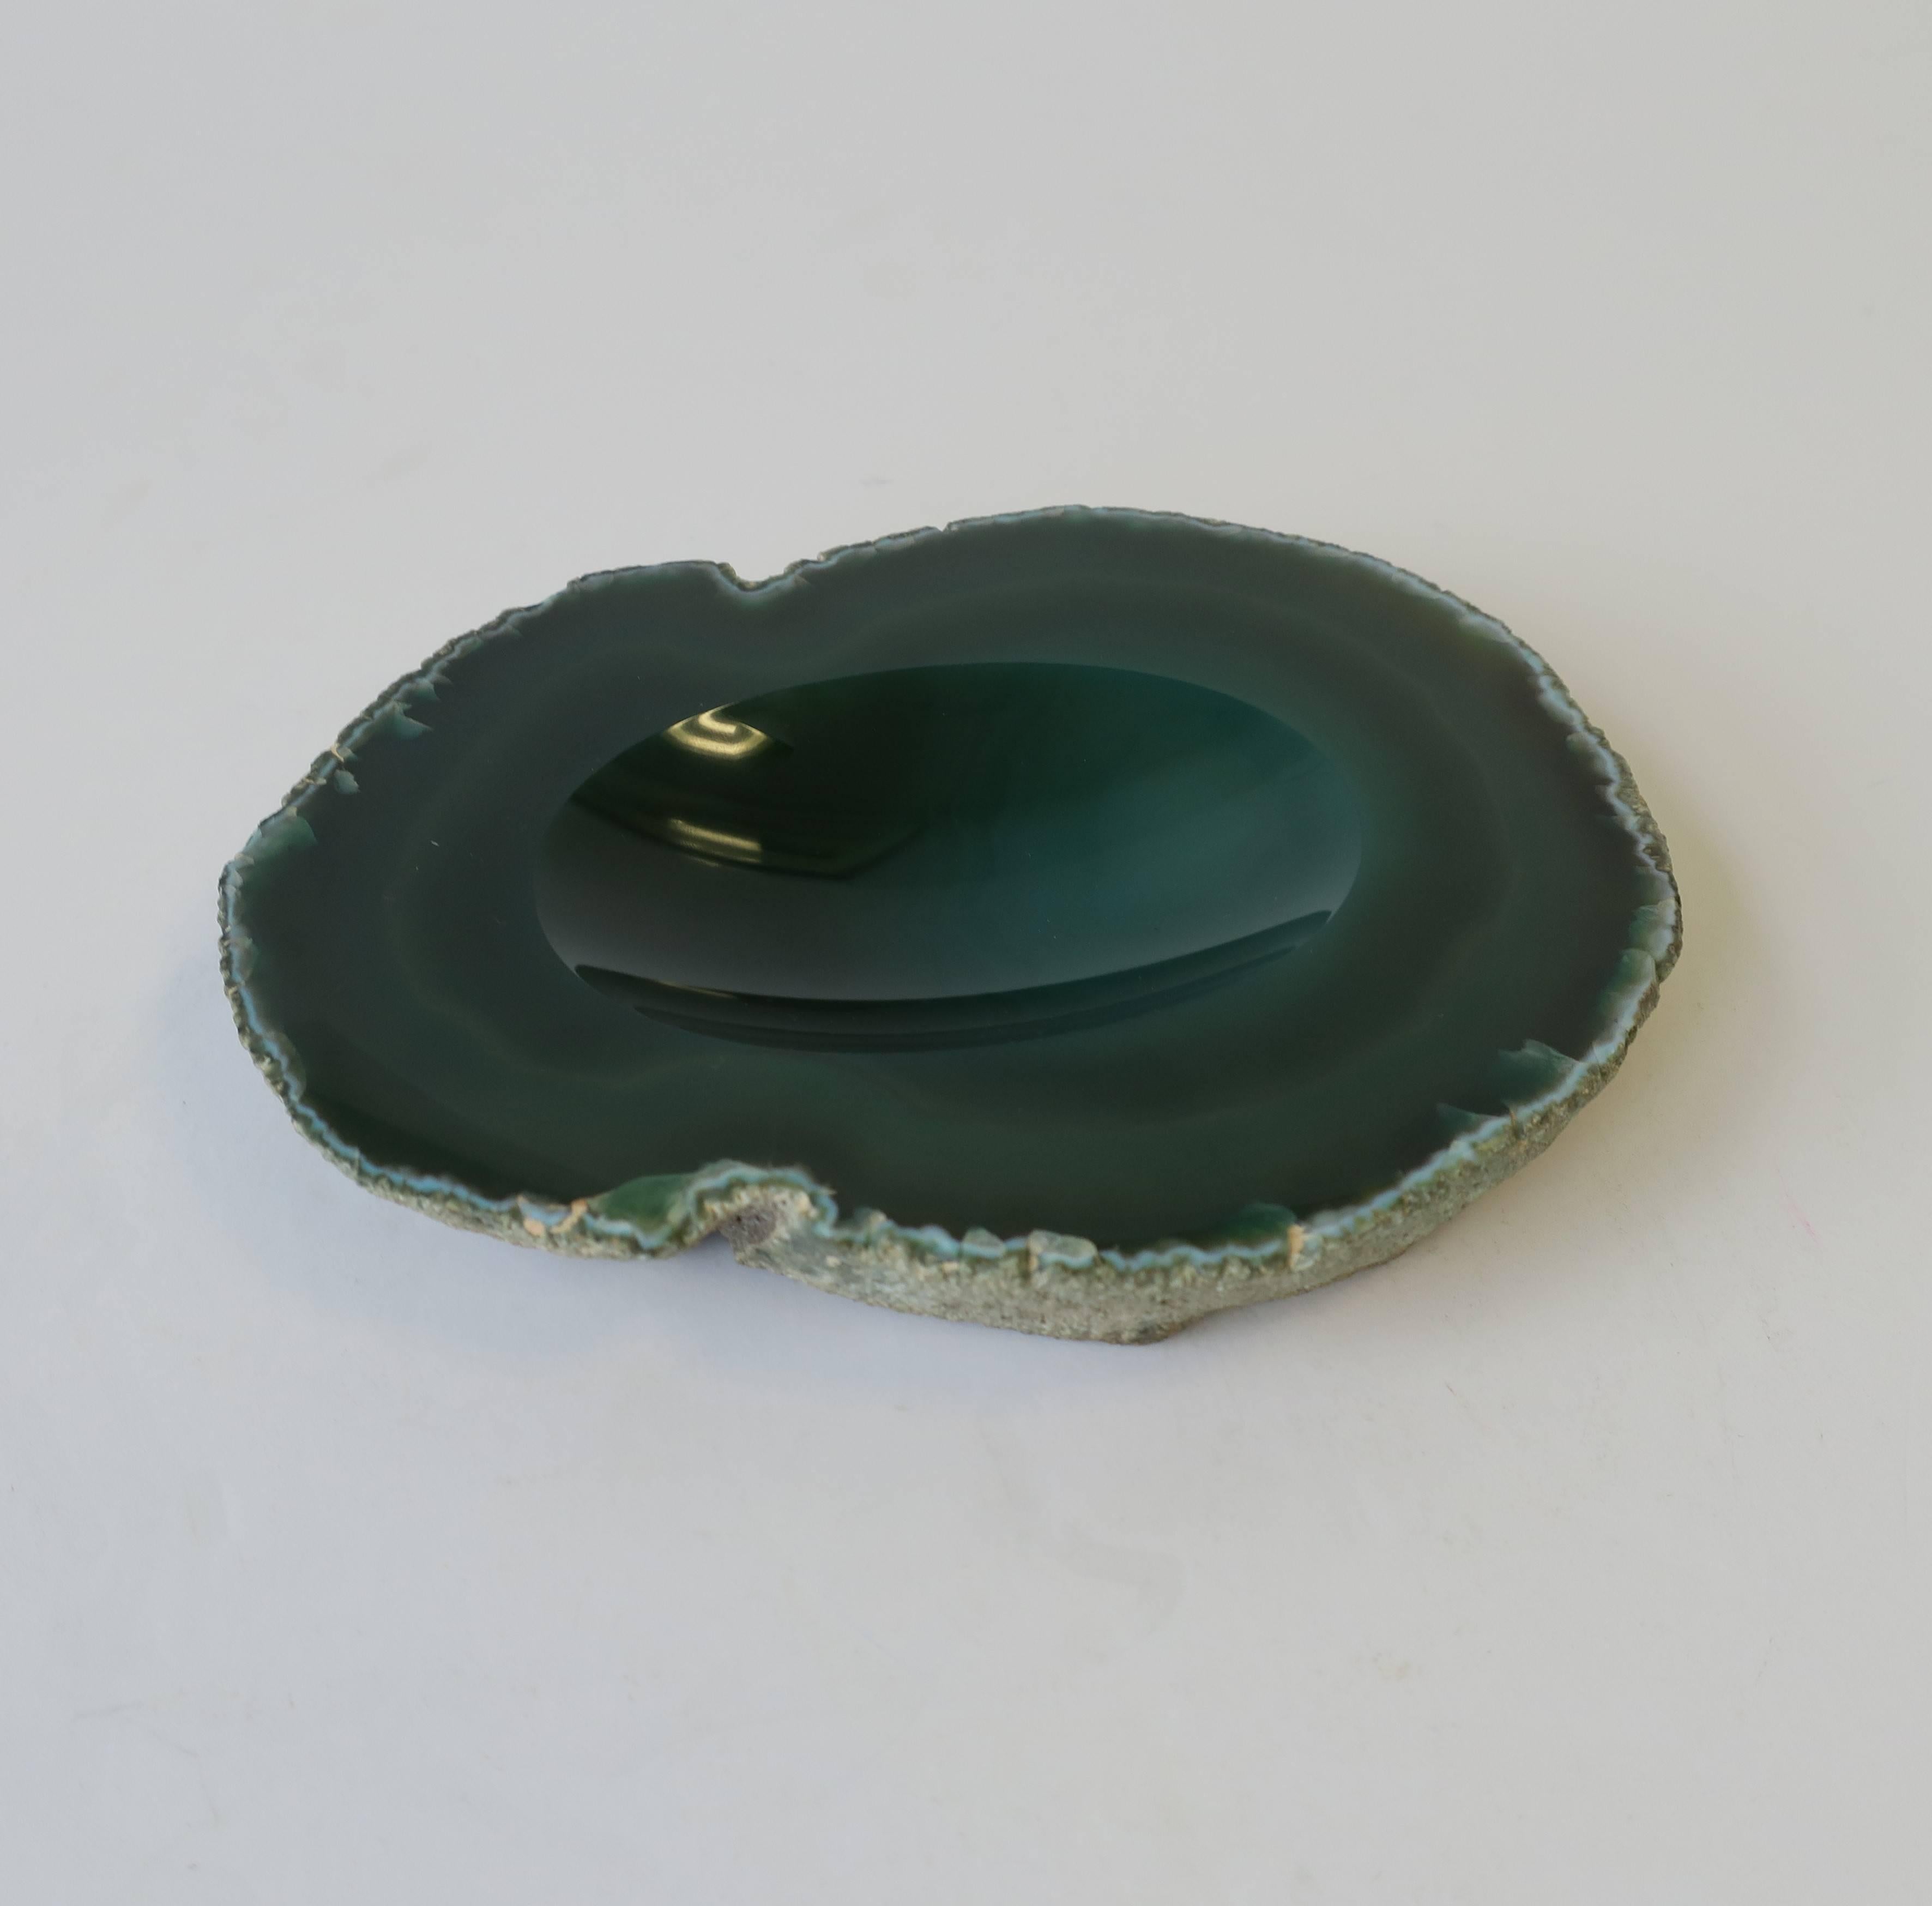 A beautiful emerald green agate geode vessel bowl or decorative object. Piece can work as a small jewelry dish (as show in image #5), as a standalone piece, or paperweight/desk accessory for small items, etc. Elegant and convenient for a table,